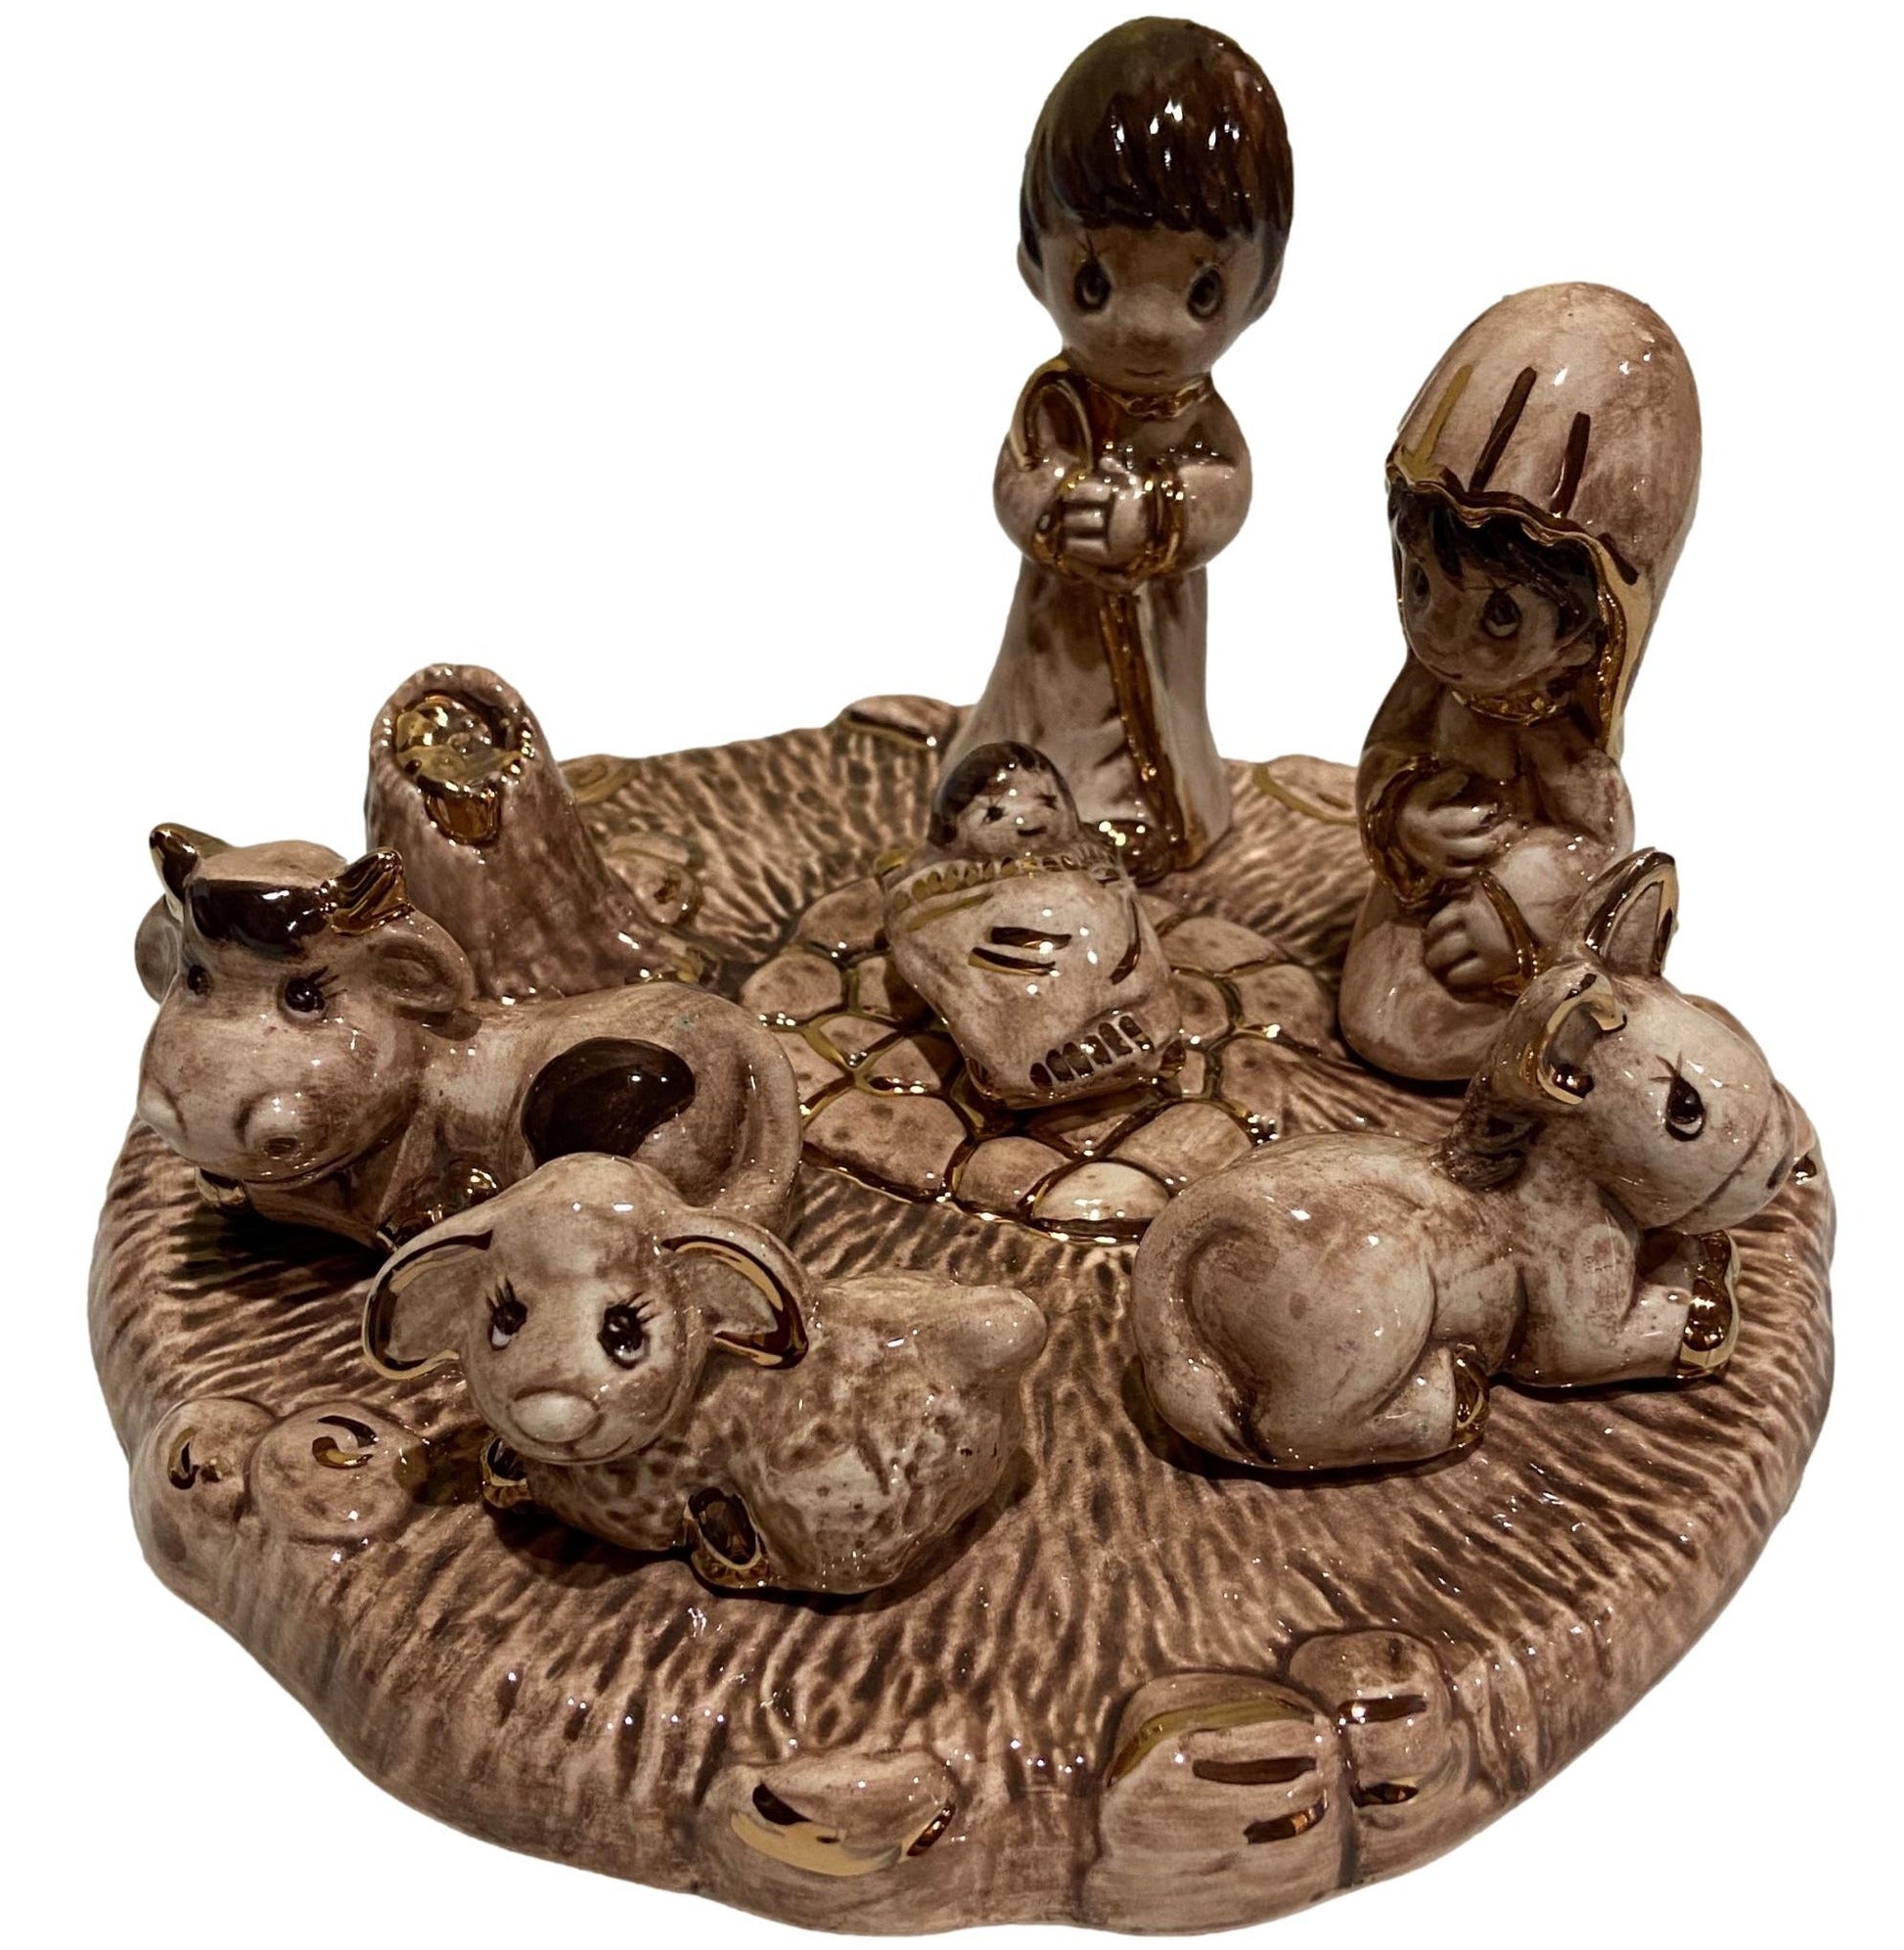 Nativity Statue Nativity Glazed Ceramic 14K Gold Detailing Handcrafted By Local El Paso Artist SET of 7 Pieces 7.5"W X 3.5" H - Ysleta Mission Gift Shop- VOTED 2022 El Paso's Best Gift Shop